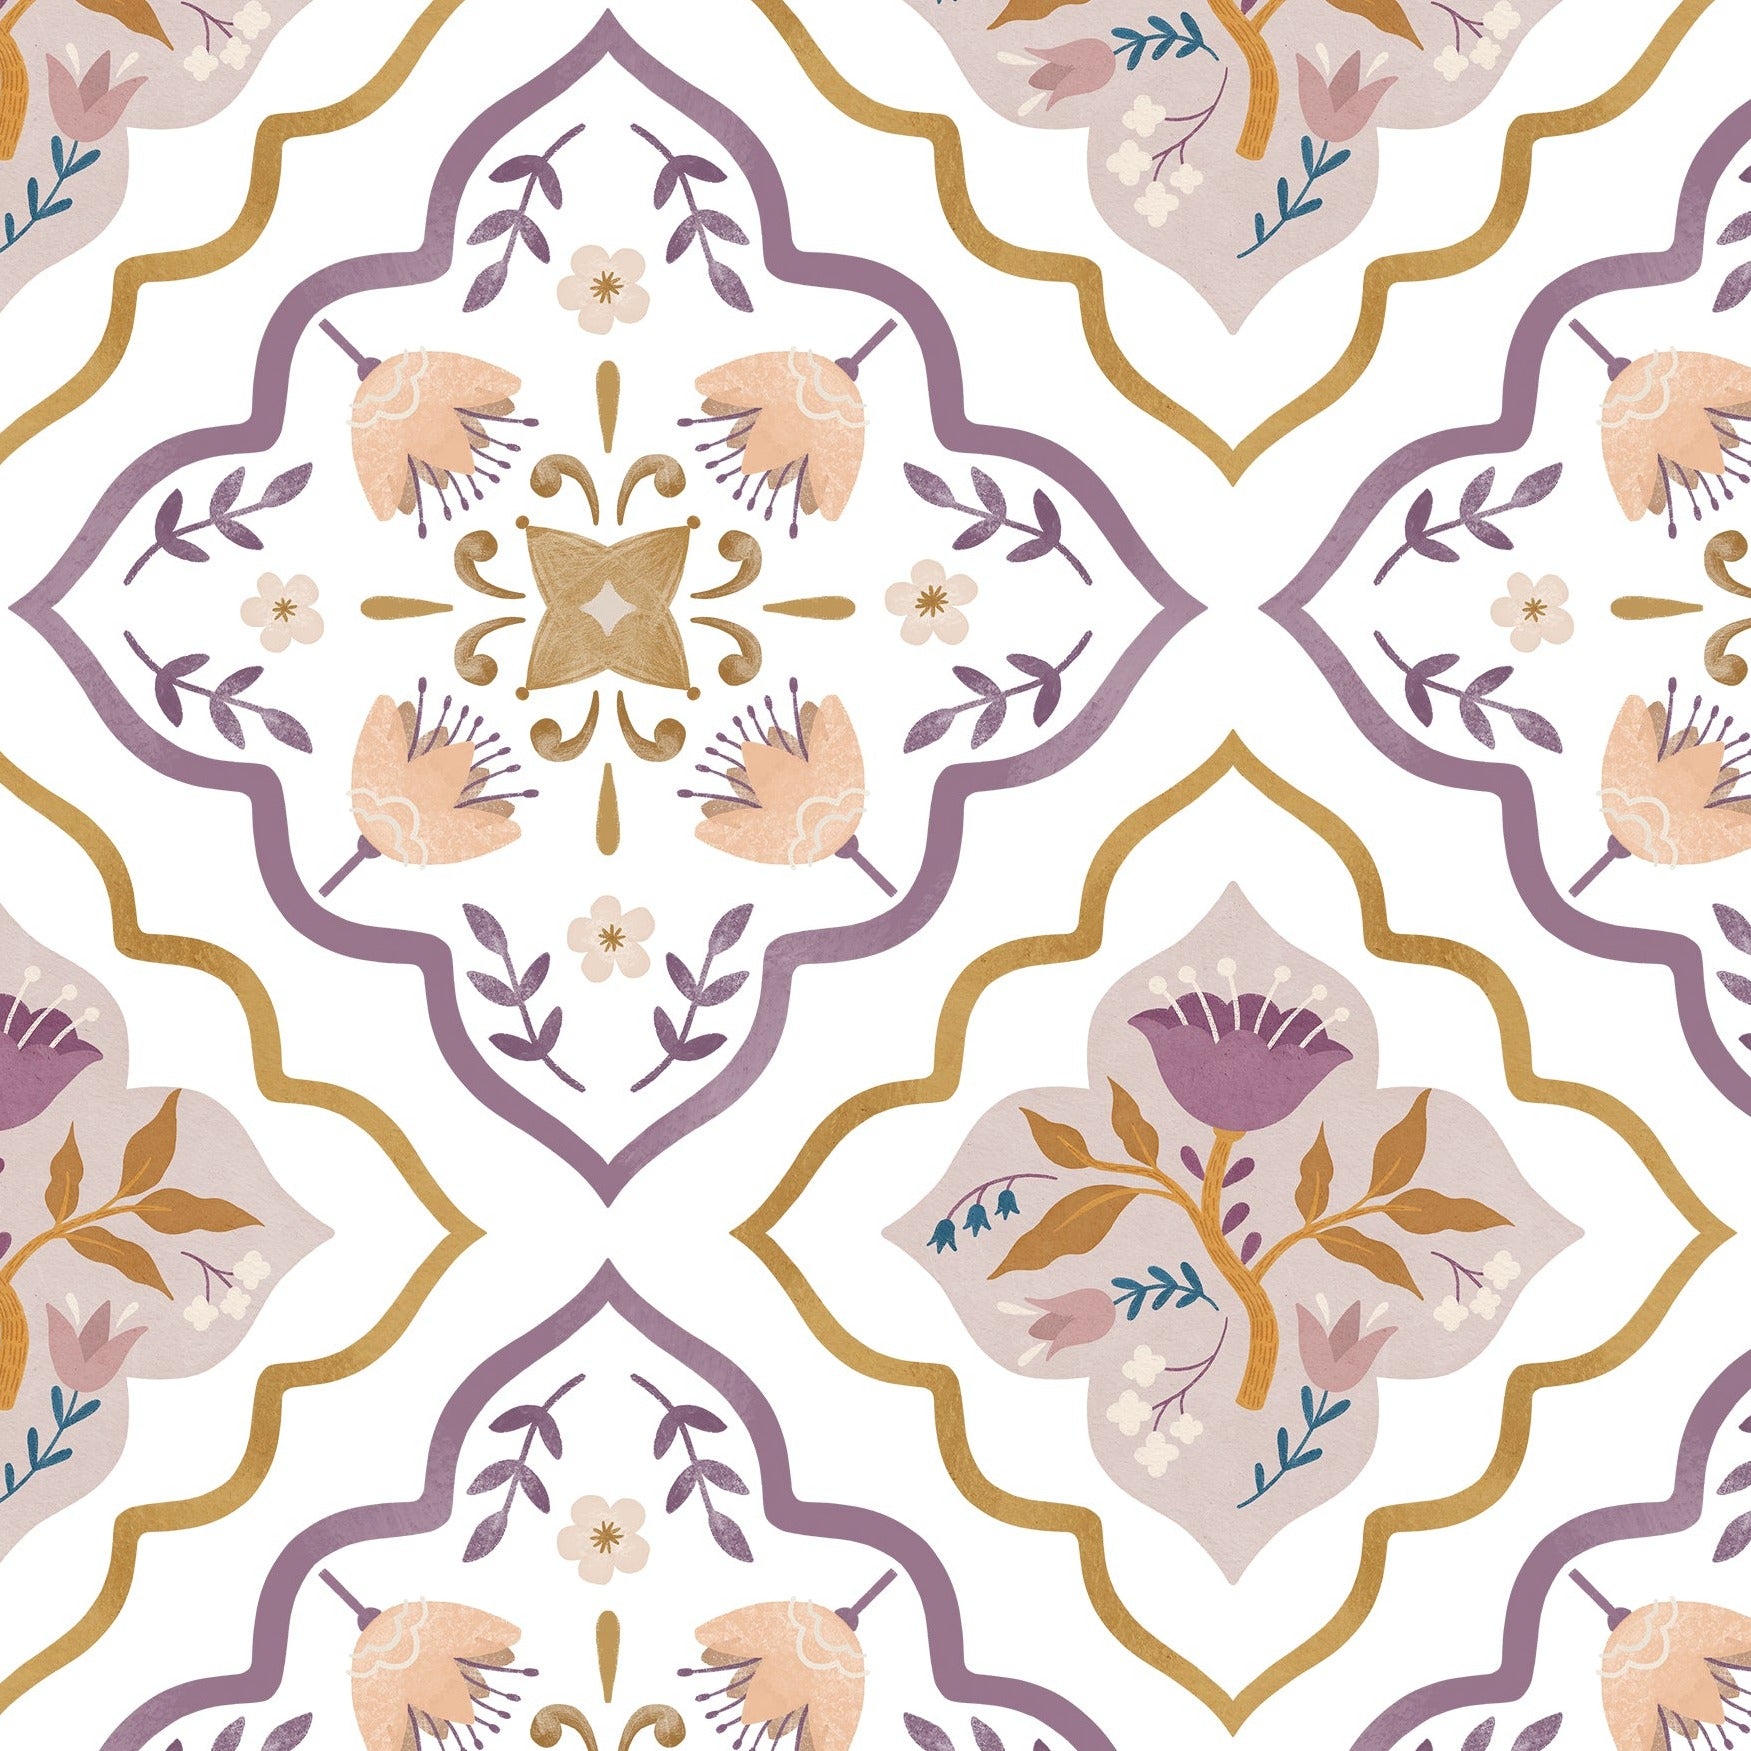 Close-up of Moroccan Floral Tile Wallpaper displaying an intricate design of floral and geometric elements in purple, gold, and beige